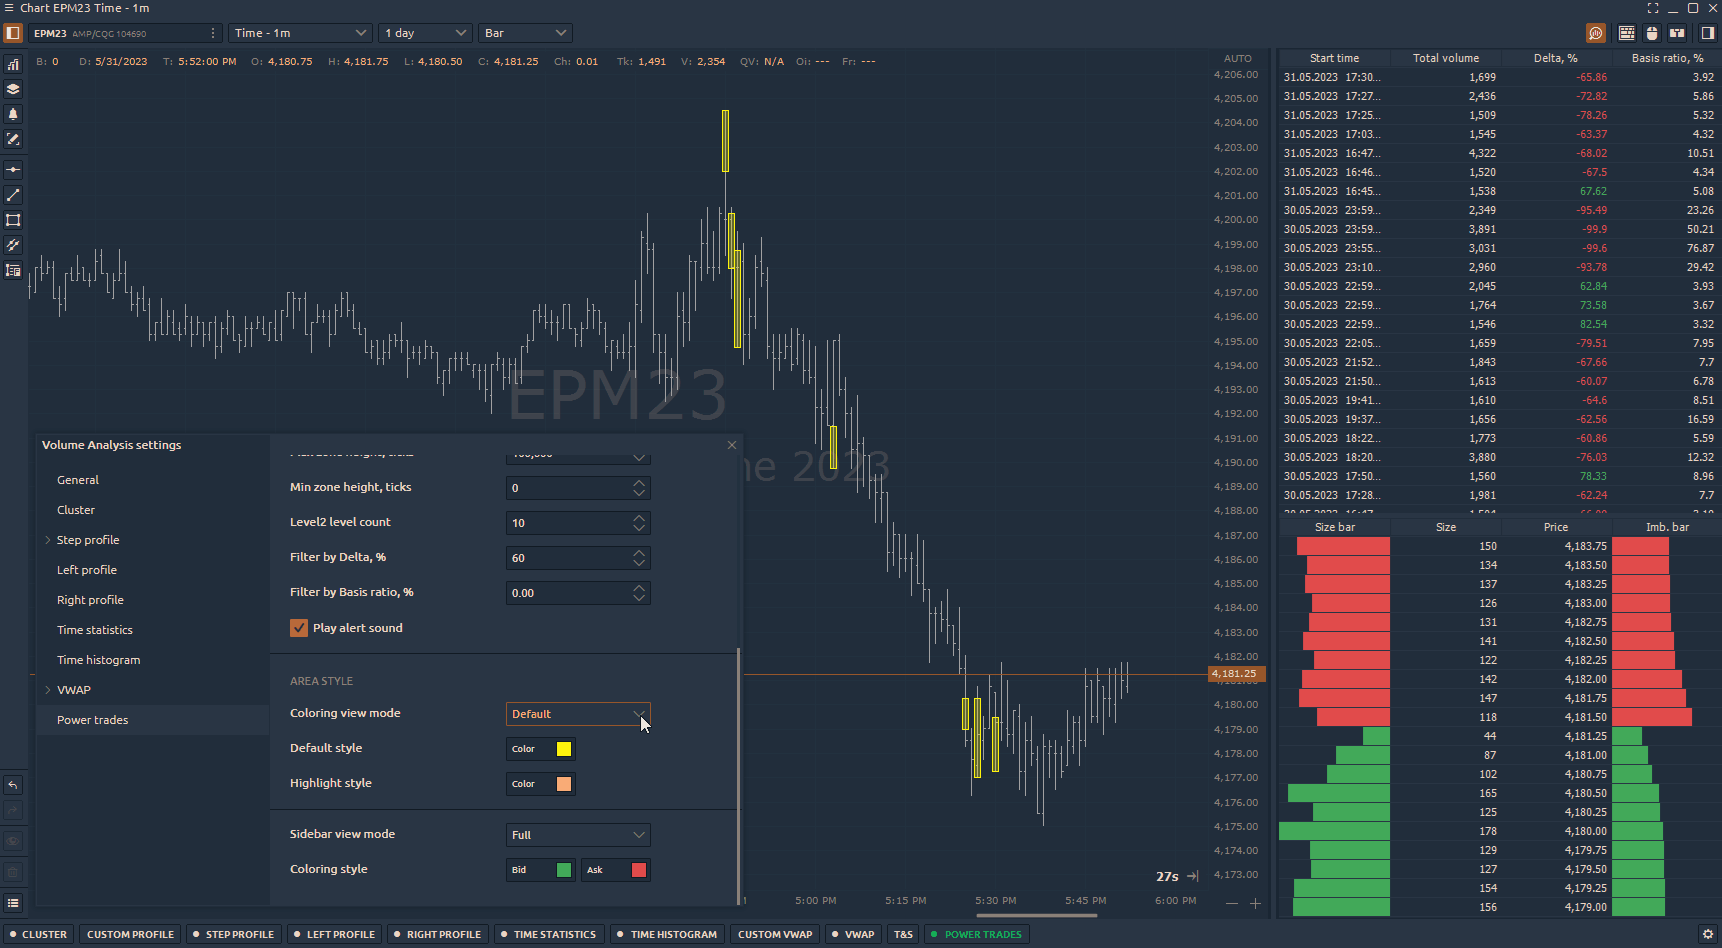 Power Trades got new coloring modes (delta, filtered volume)